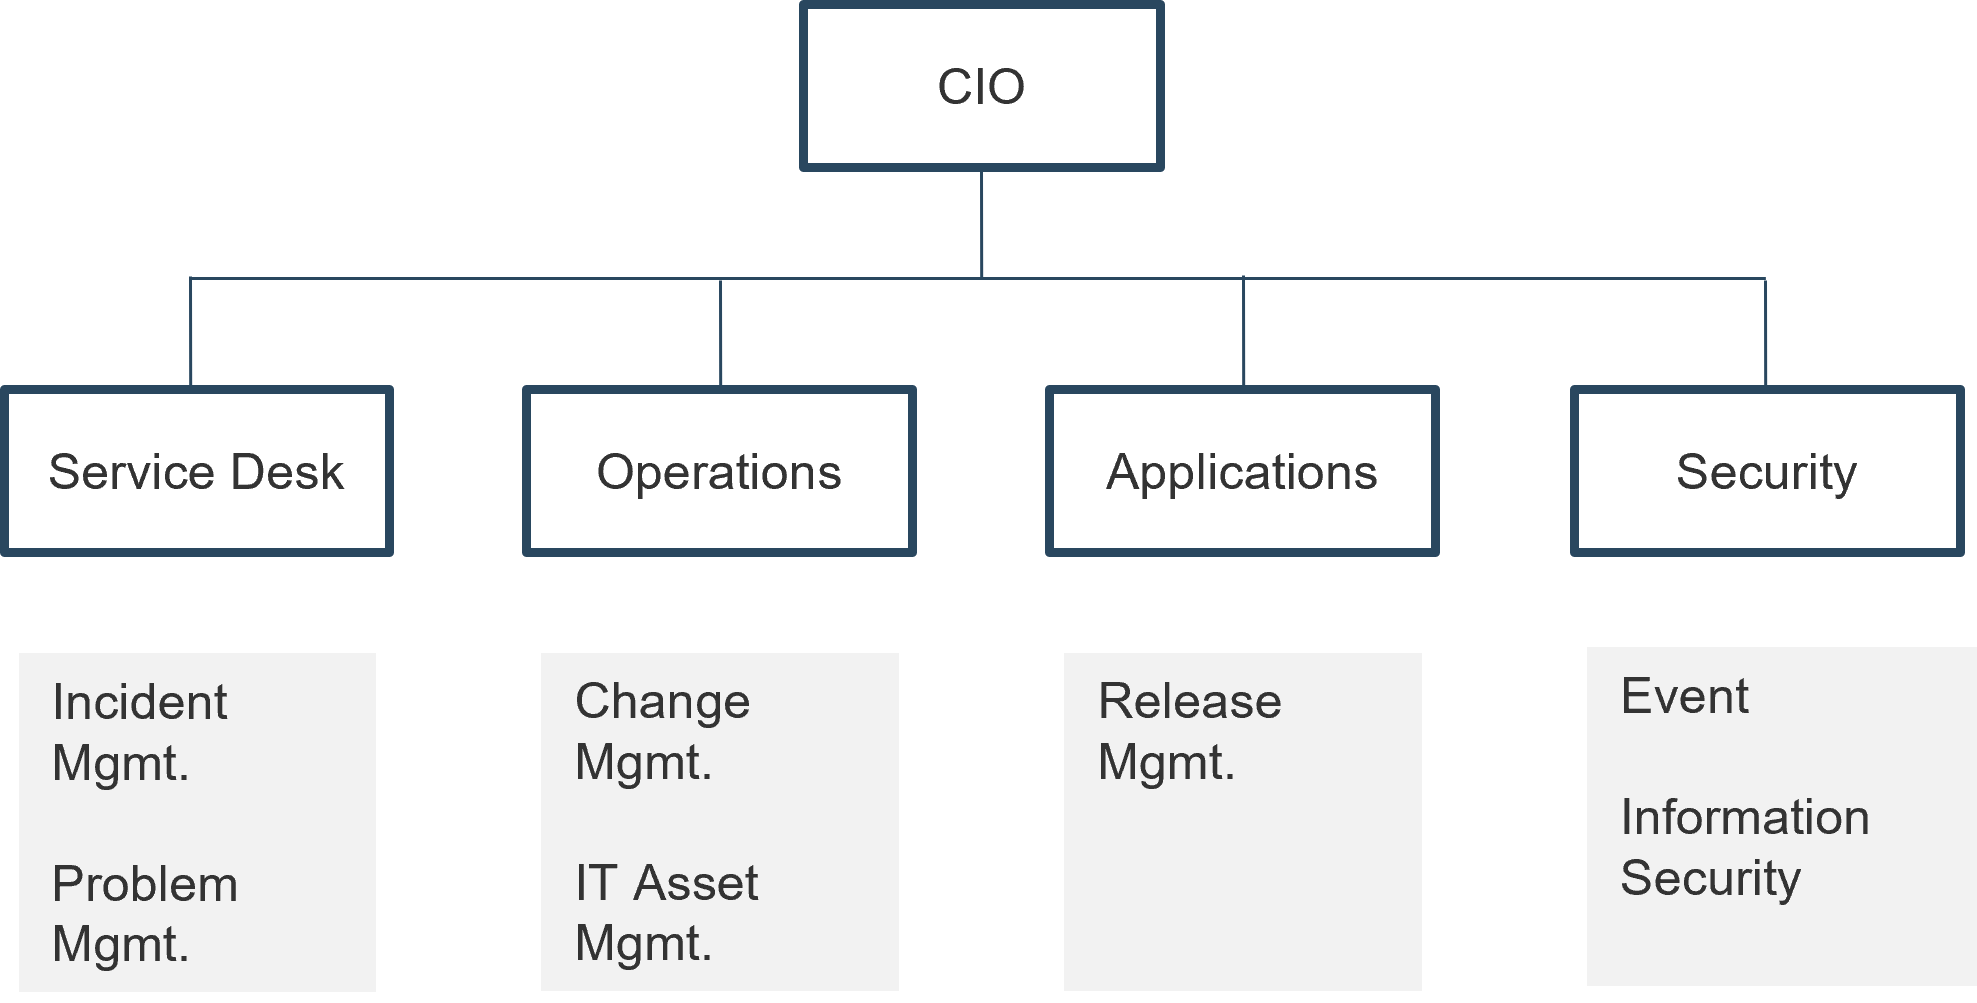 The distributed process ownership model is shown. CIO is listed at the top with four branches leading out from below it. The four branches are labelled: Service Desk, Operations, Applications, and Security.